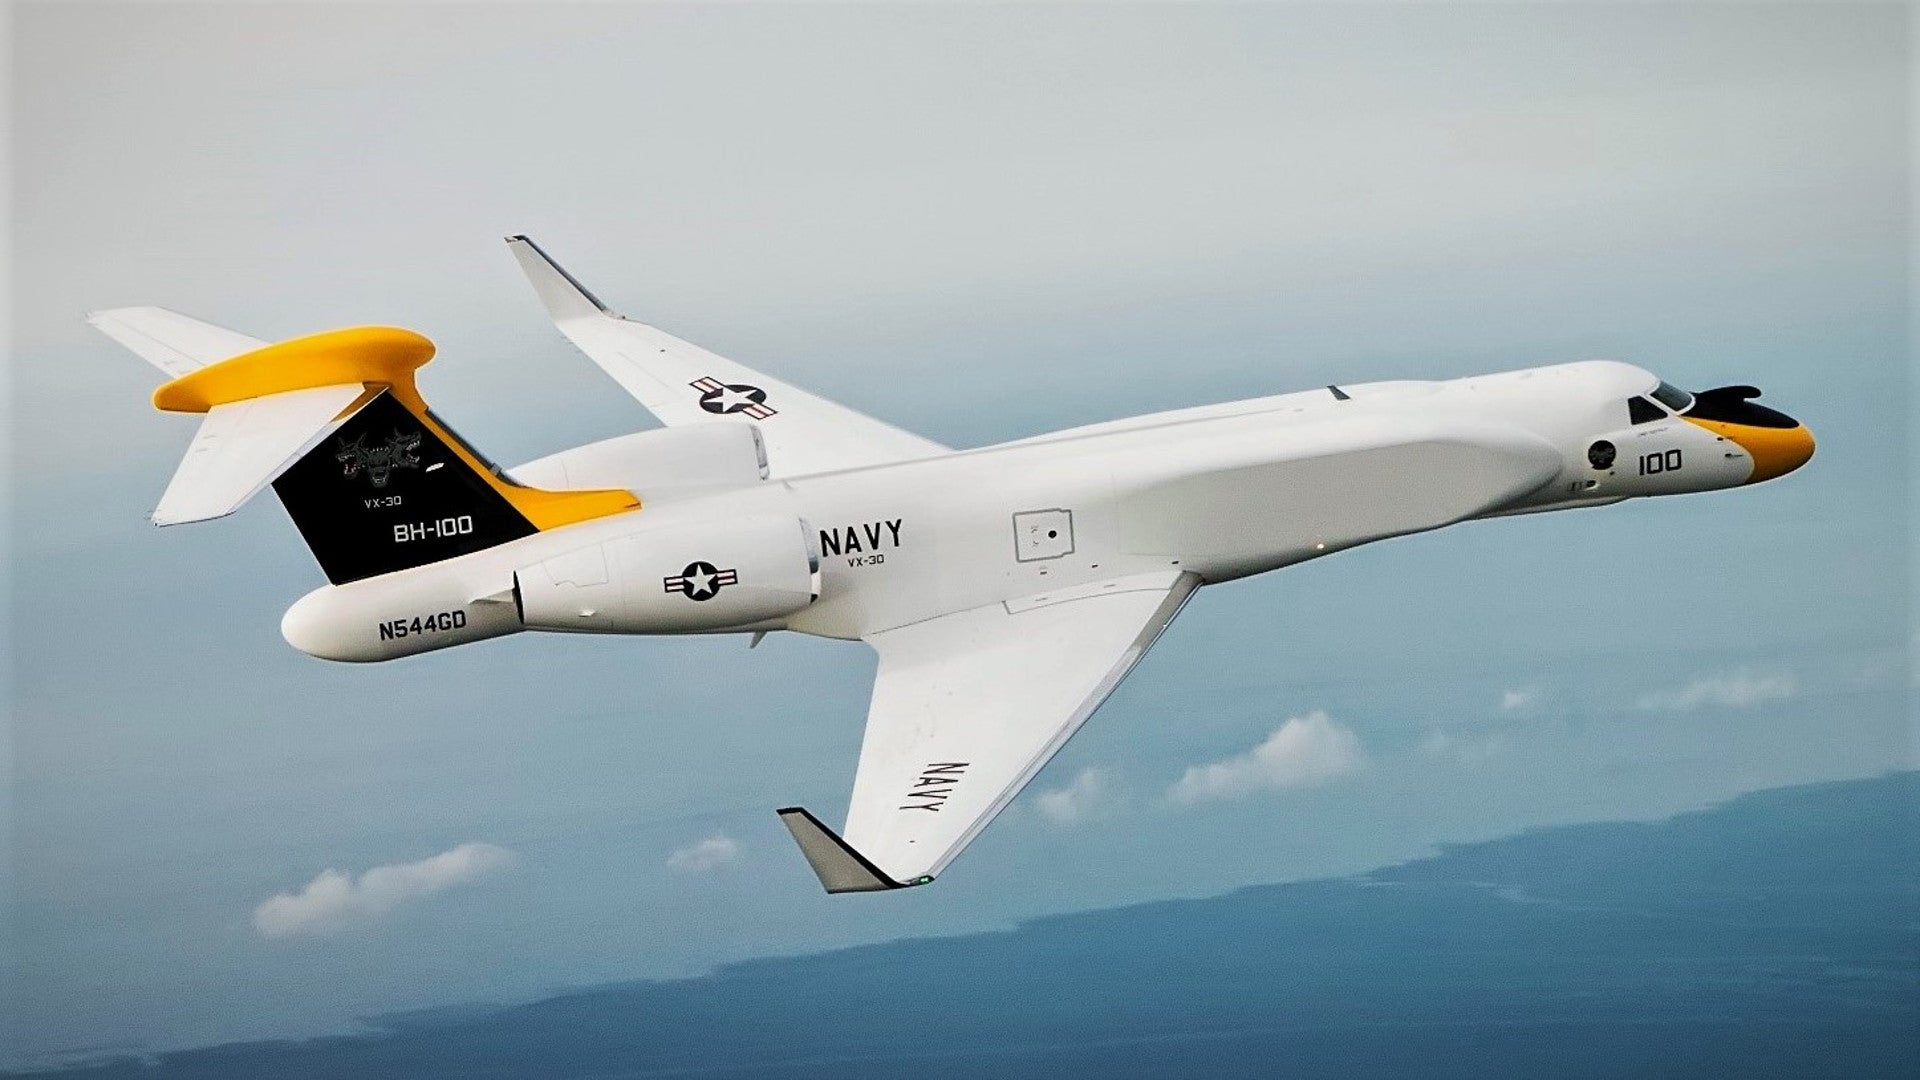 Behold The First Official Photo Of The Navy’s New NC-37B Missile Tracking Jet